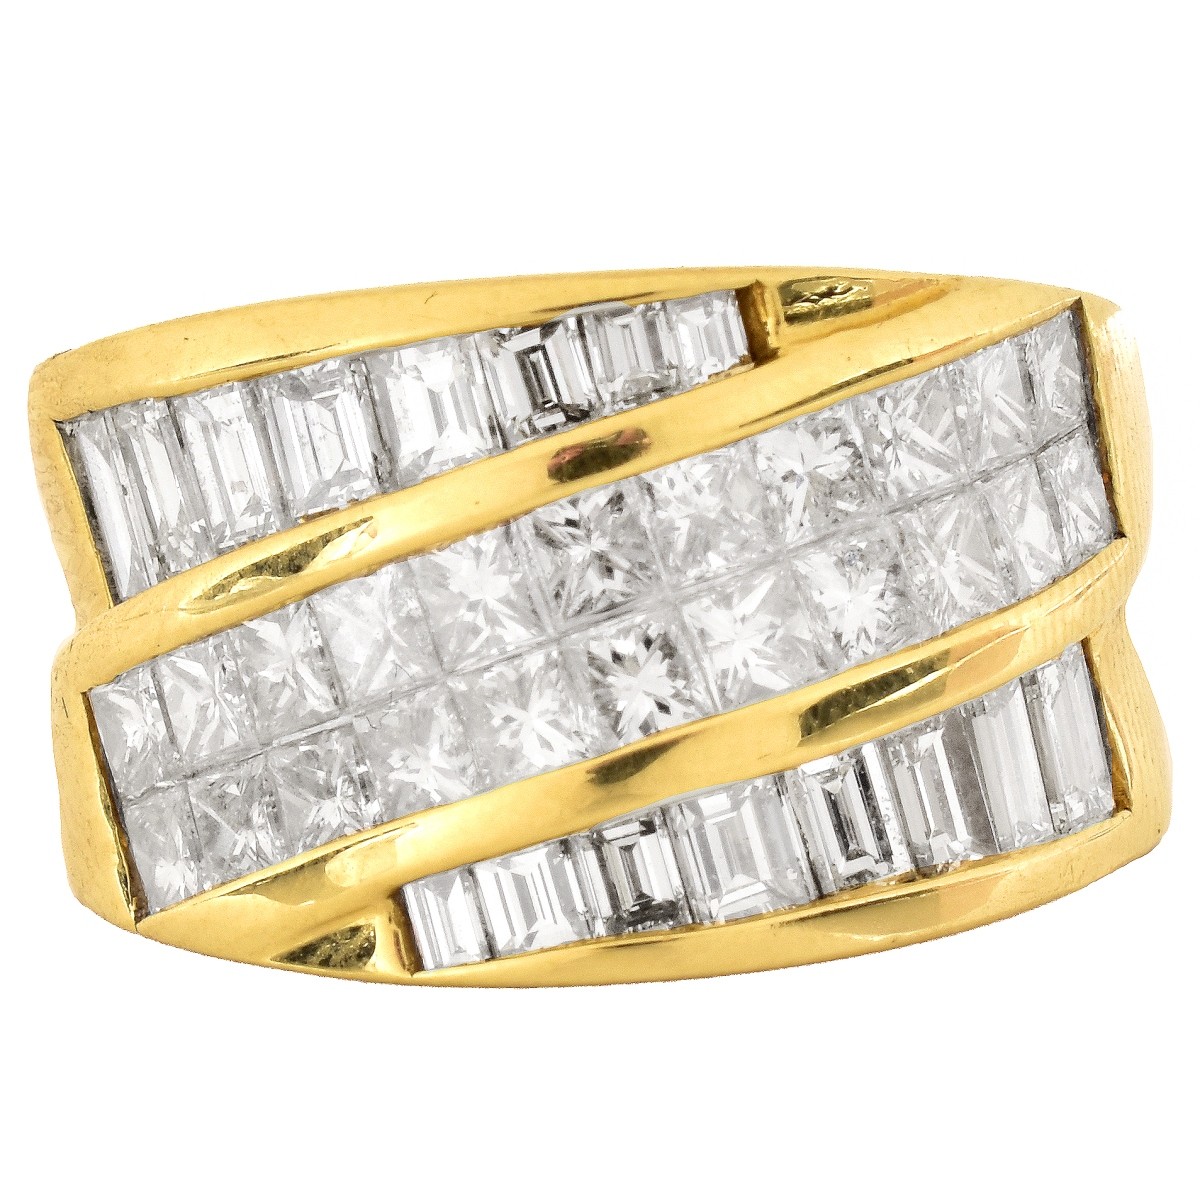 3.45ct TW Diamond and 18K Gold Ring